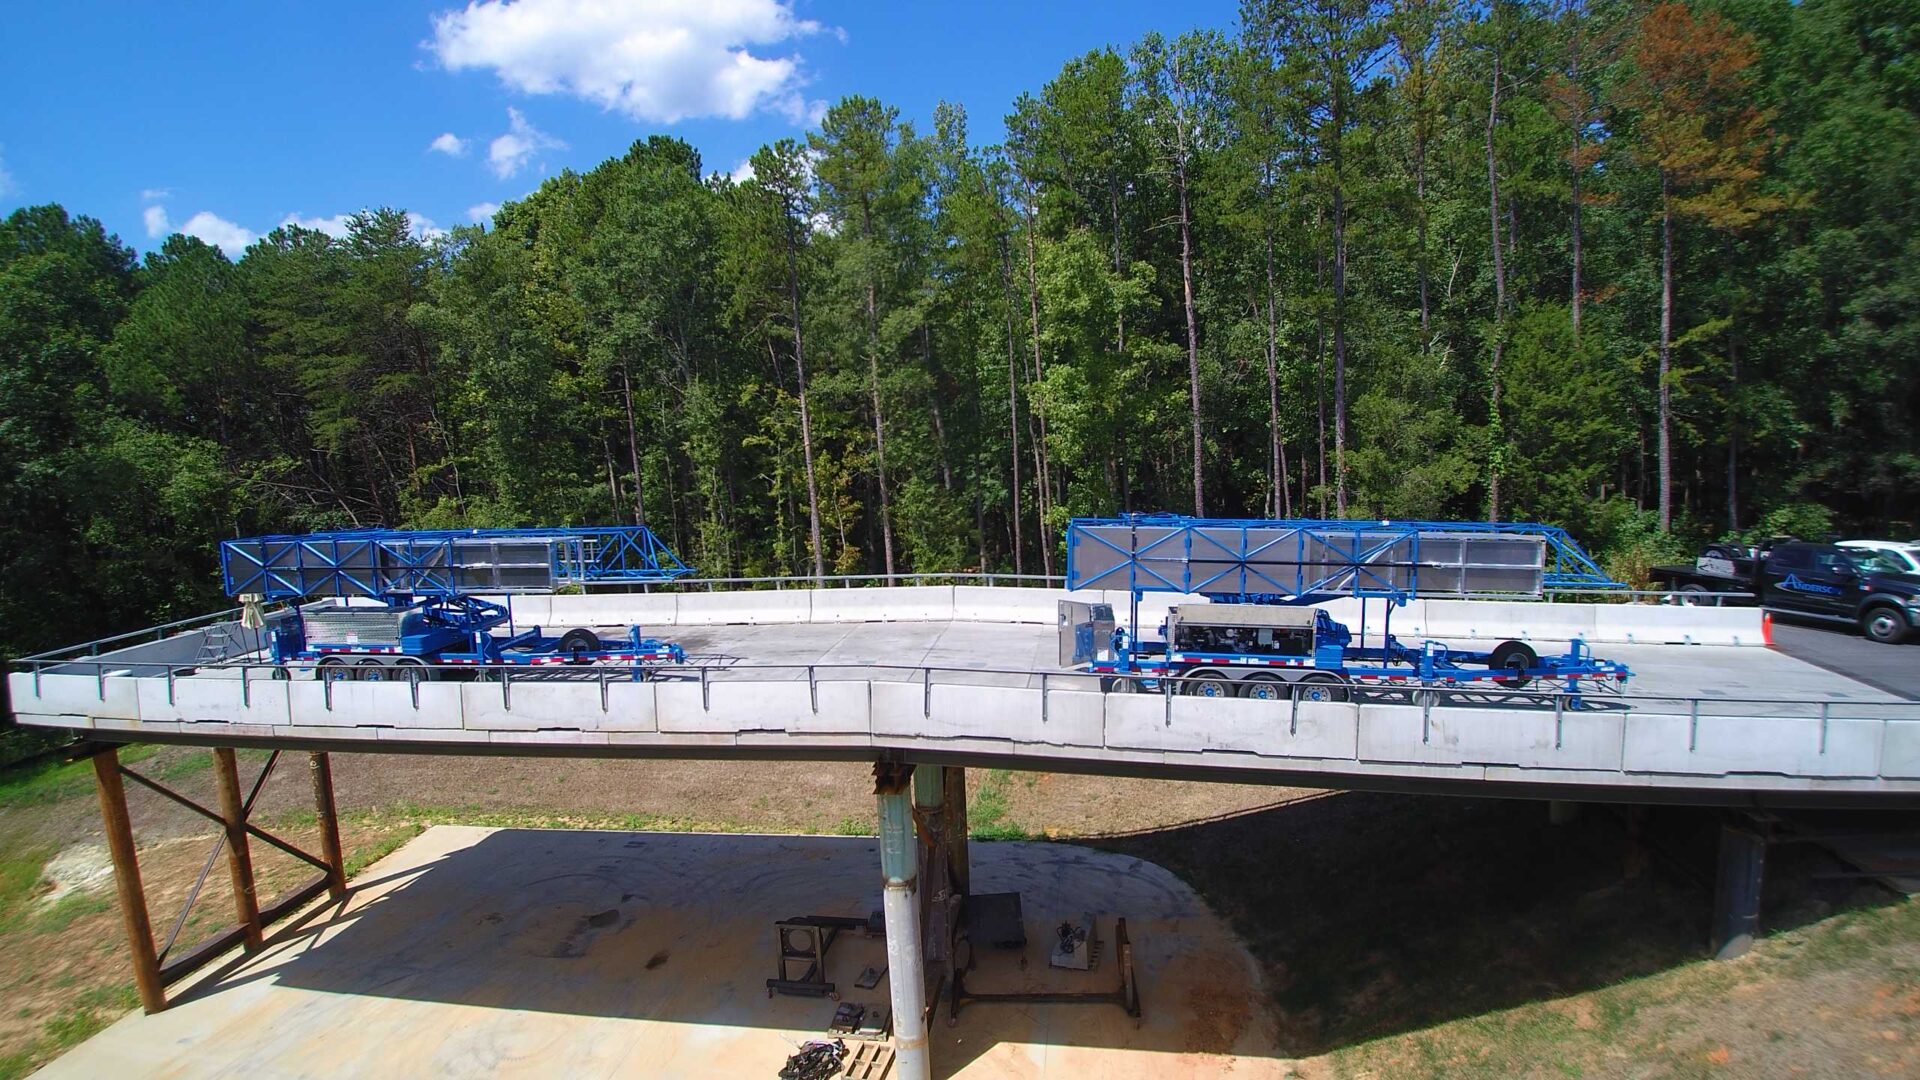 A construction area with blue color motor vehicles